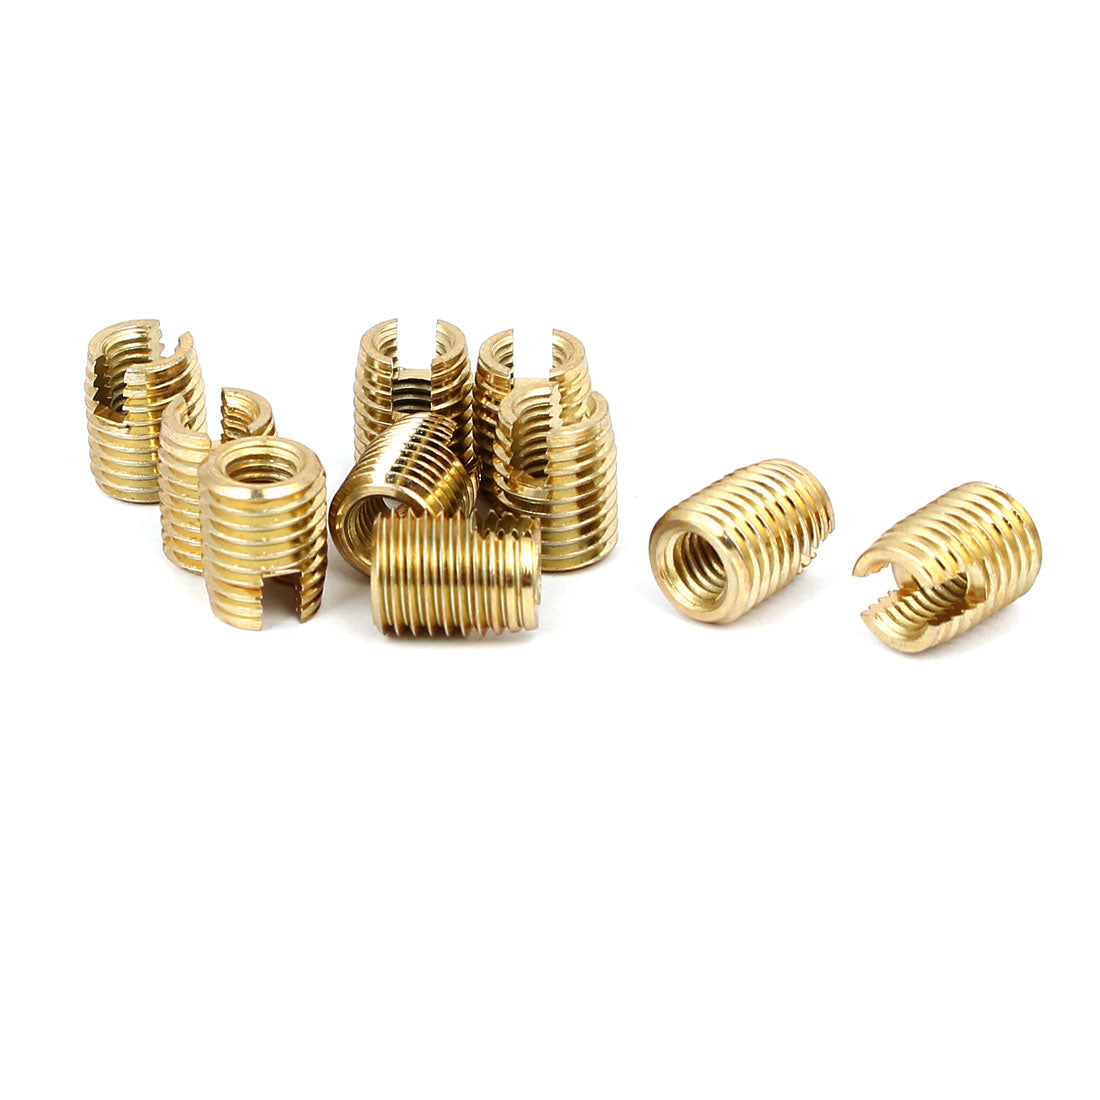 uxcell Uxcell M8 x M5 10mm Length Self Tapping Threaded Insert Slotted Brass Tone 10pcs